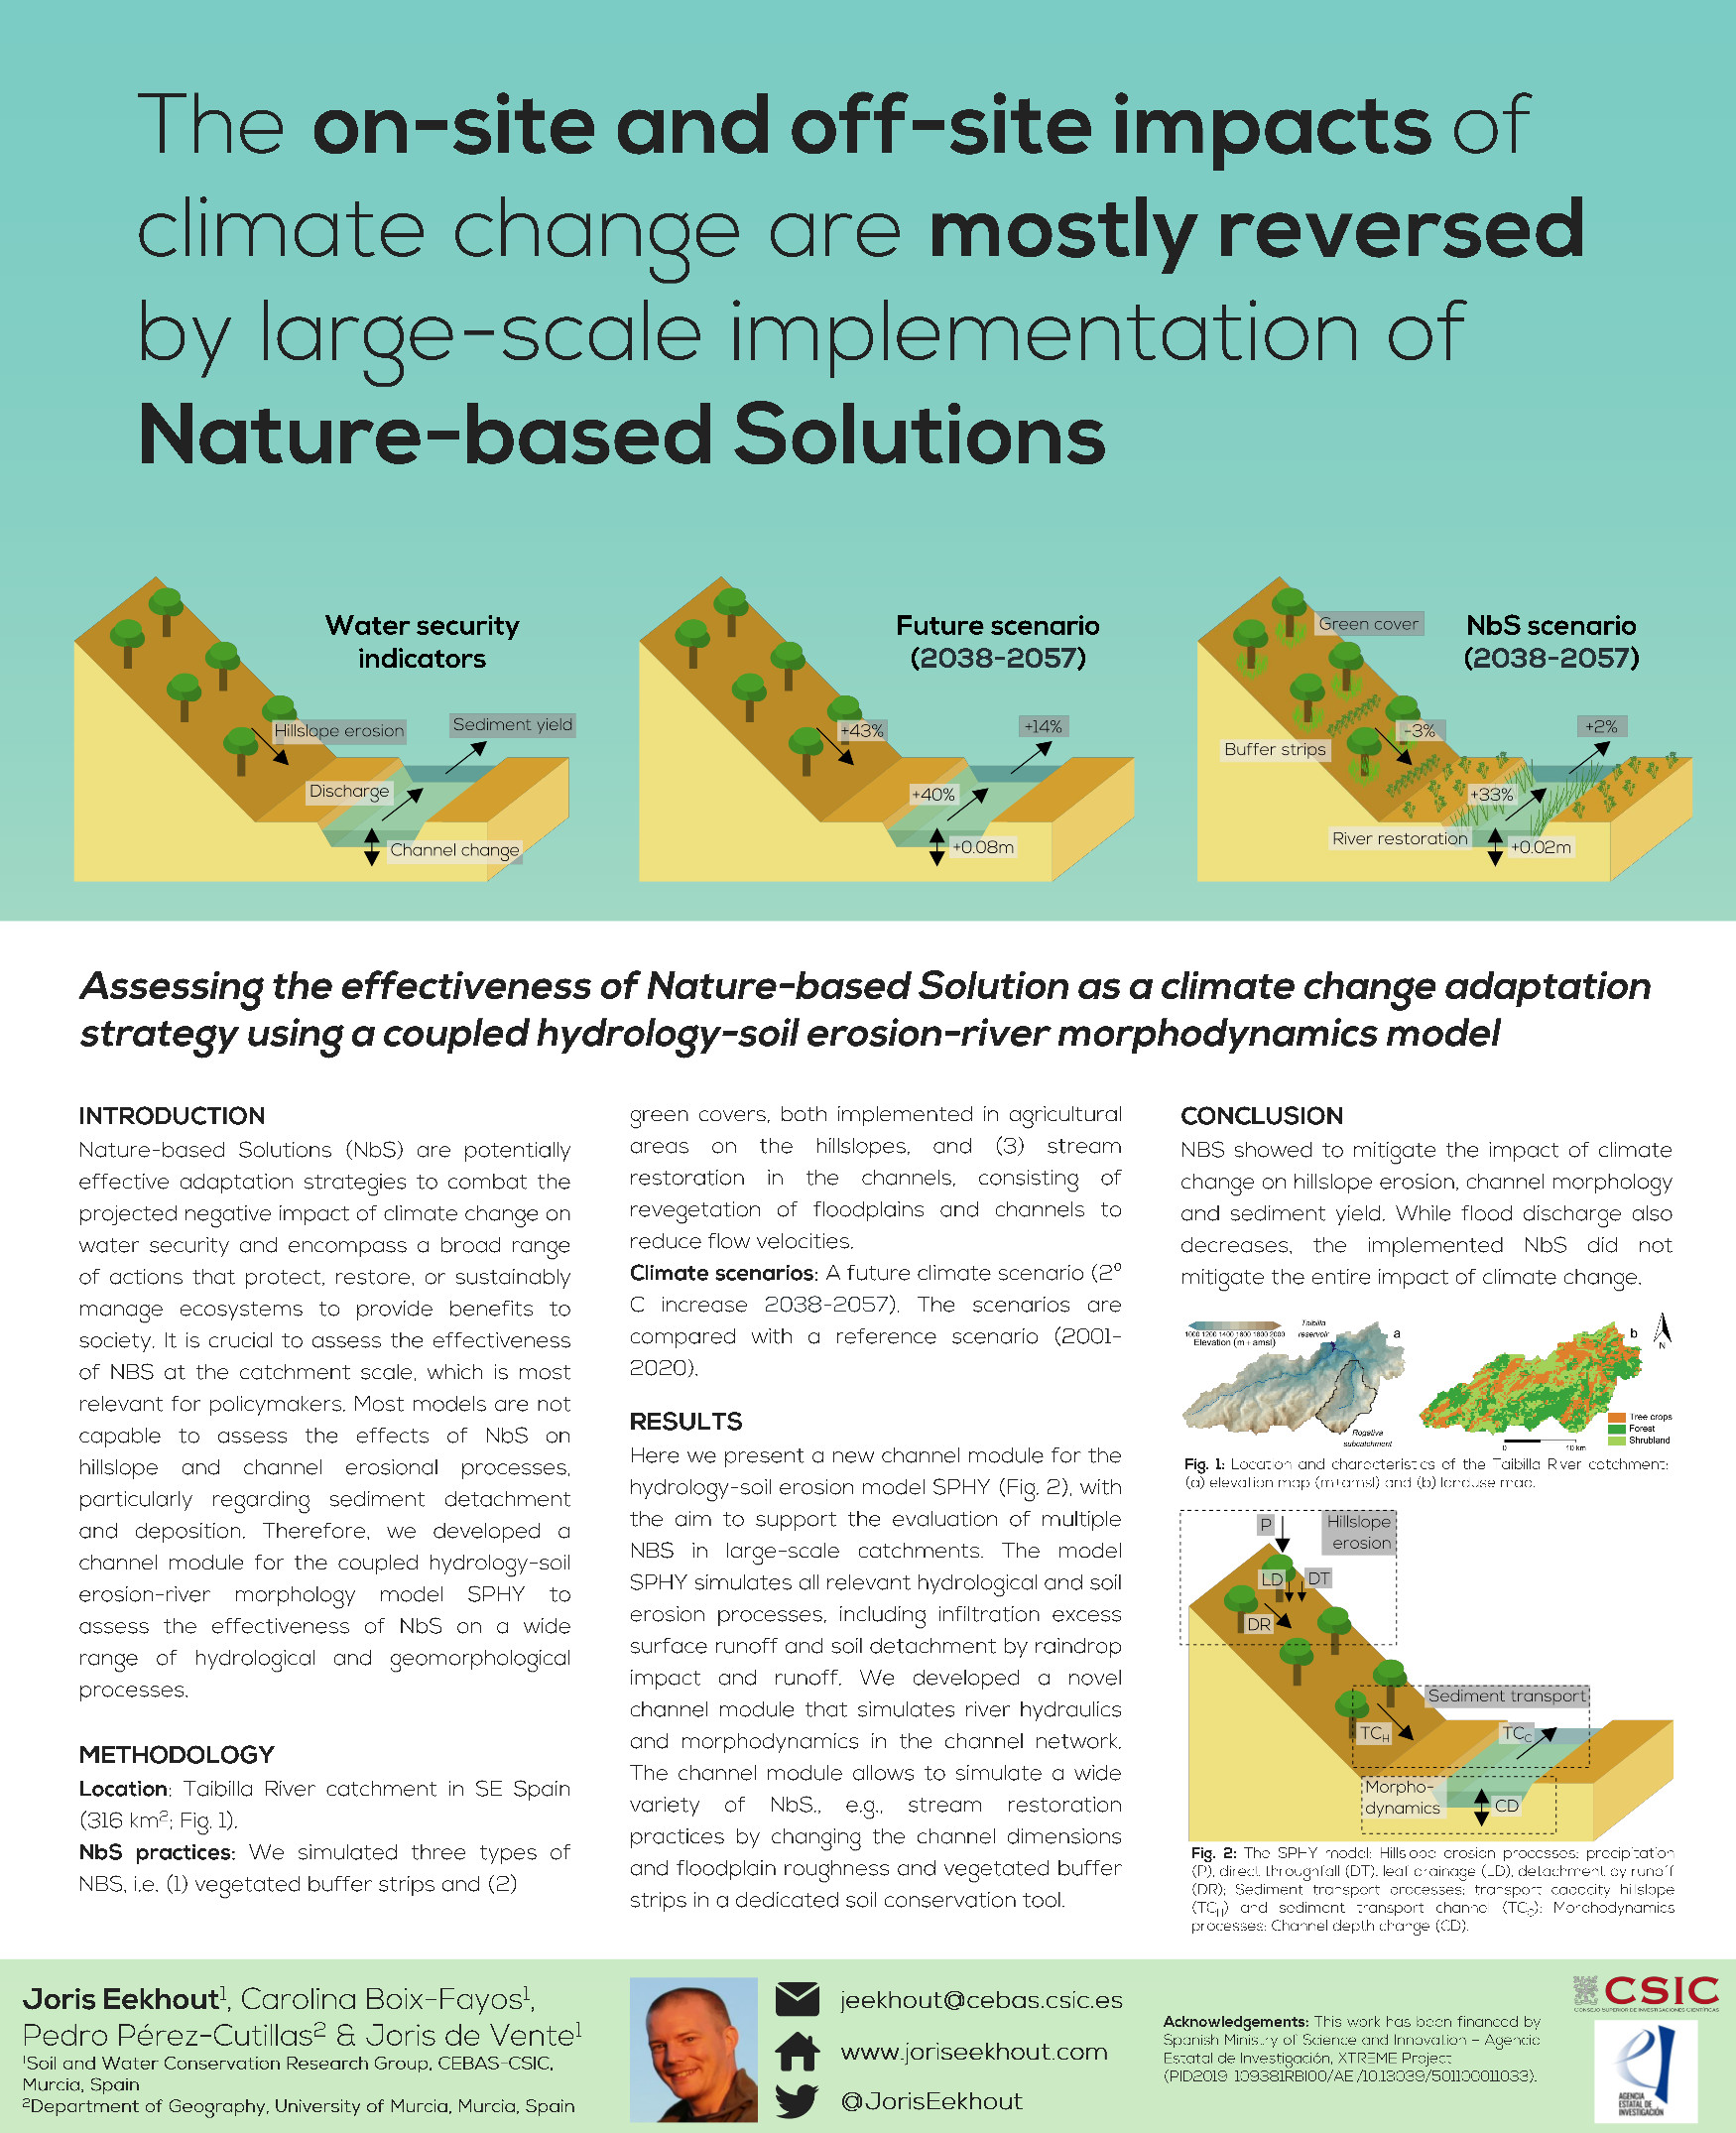 Assessing the effectiveness of Nature-based Solution as a climate change adaptation strategy using a coupled hydrology-soil erosion-river morphodynamics model